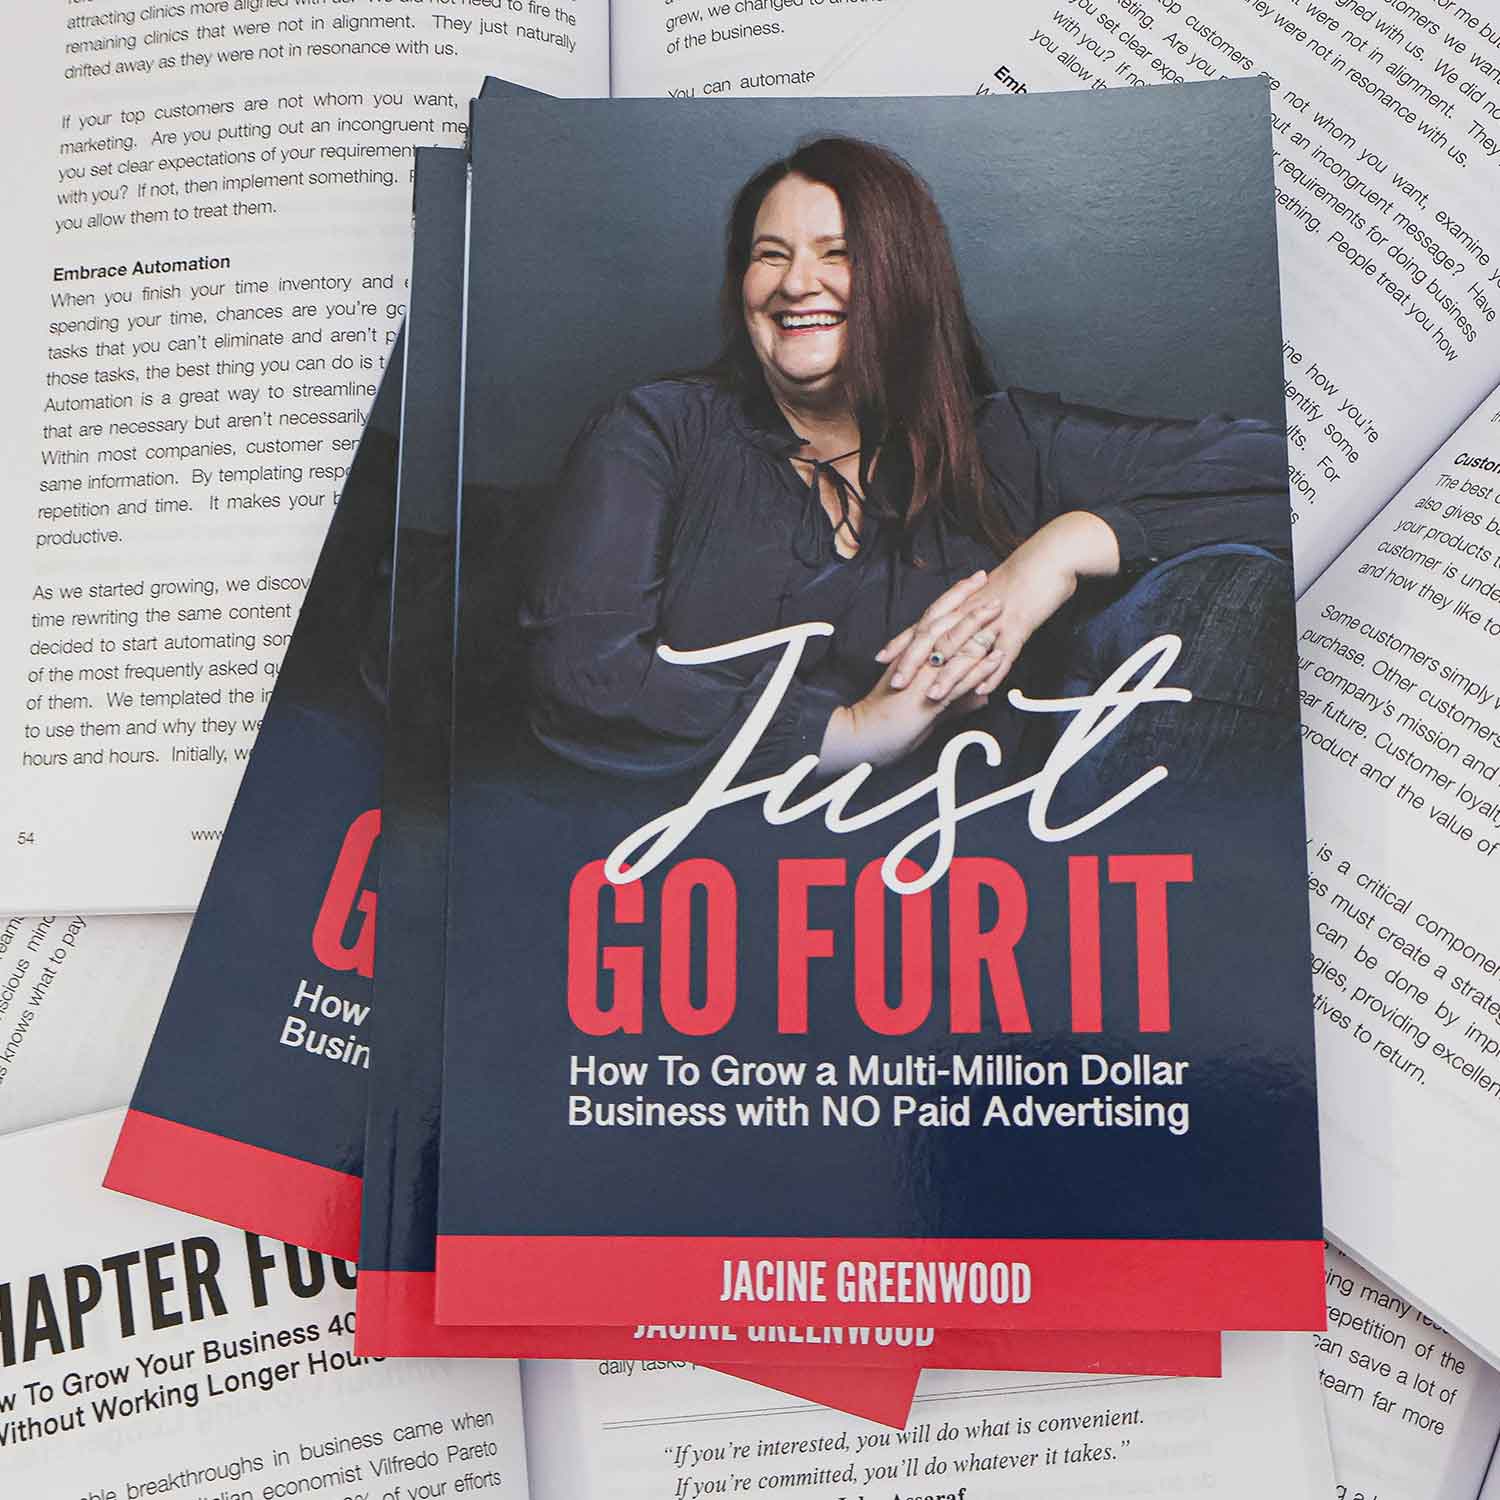 Just Go For It - How To Grow A Multimillion Dollar Business with NO Paid Ads